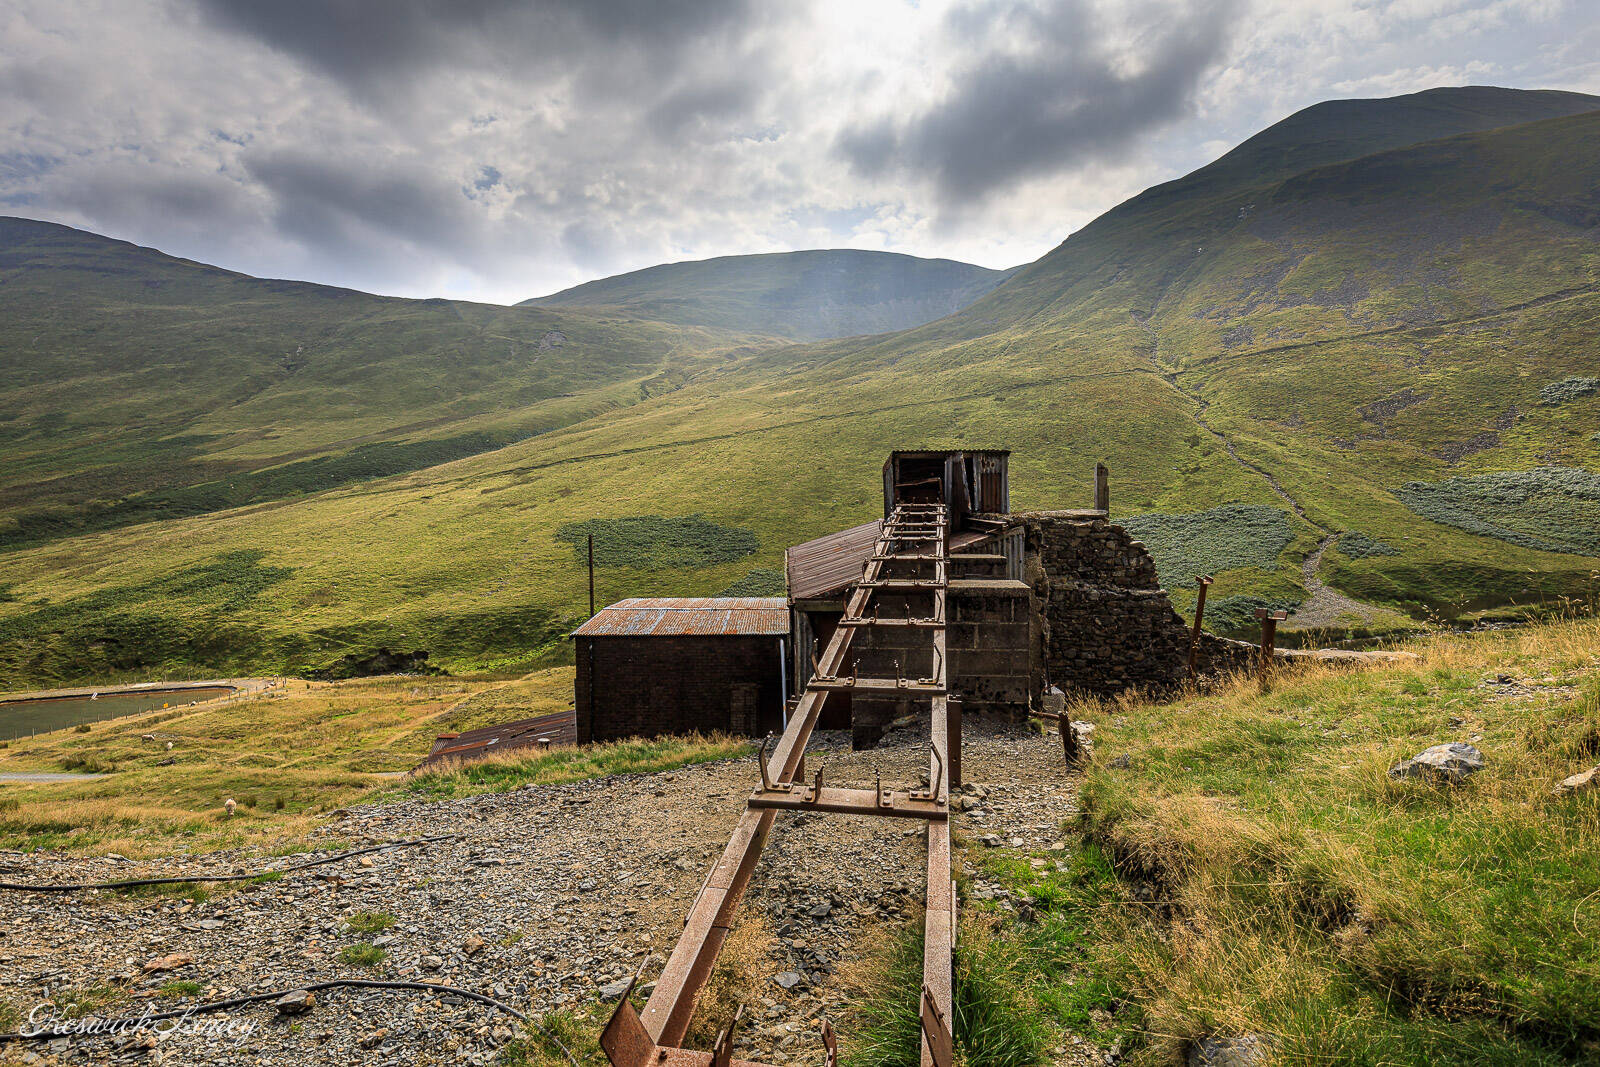 Image of Force Crag Mine by David Leighton